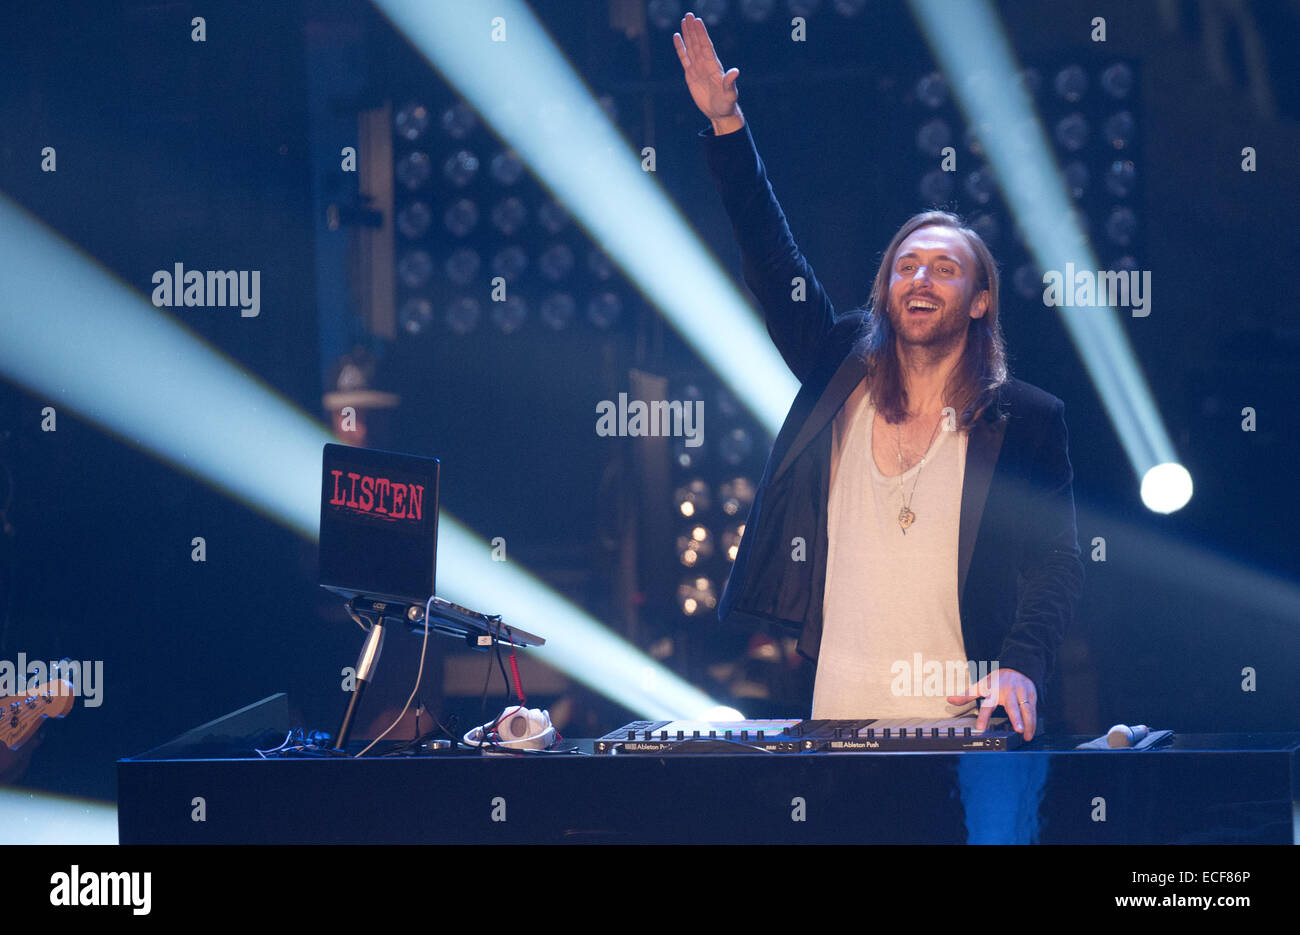 Berlin, Germany. 12th Dec, 2014. The French House DJ and music producer David Guetta stands on stage during the final of the TV show 'The Voice of Germany' in Berlin, Germany, 12 December 2014. The show is aired on the Sat.1 TV channel. Photo: Joerg Carstensen/dpa/Alamy Live News Stock Photo